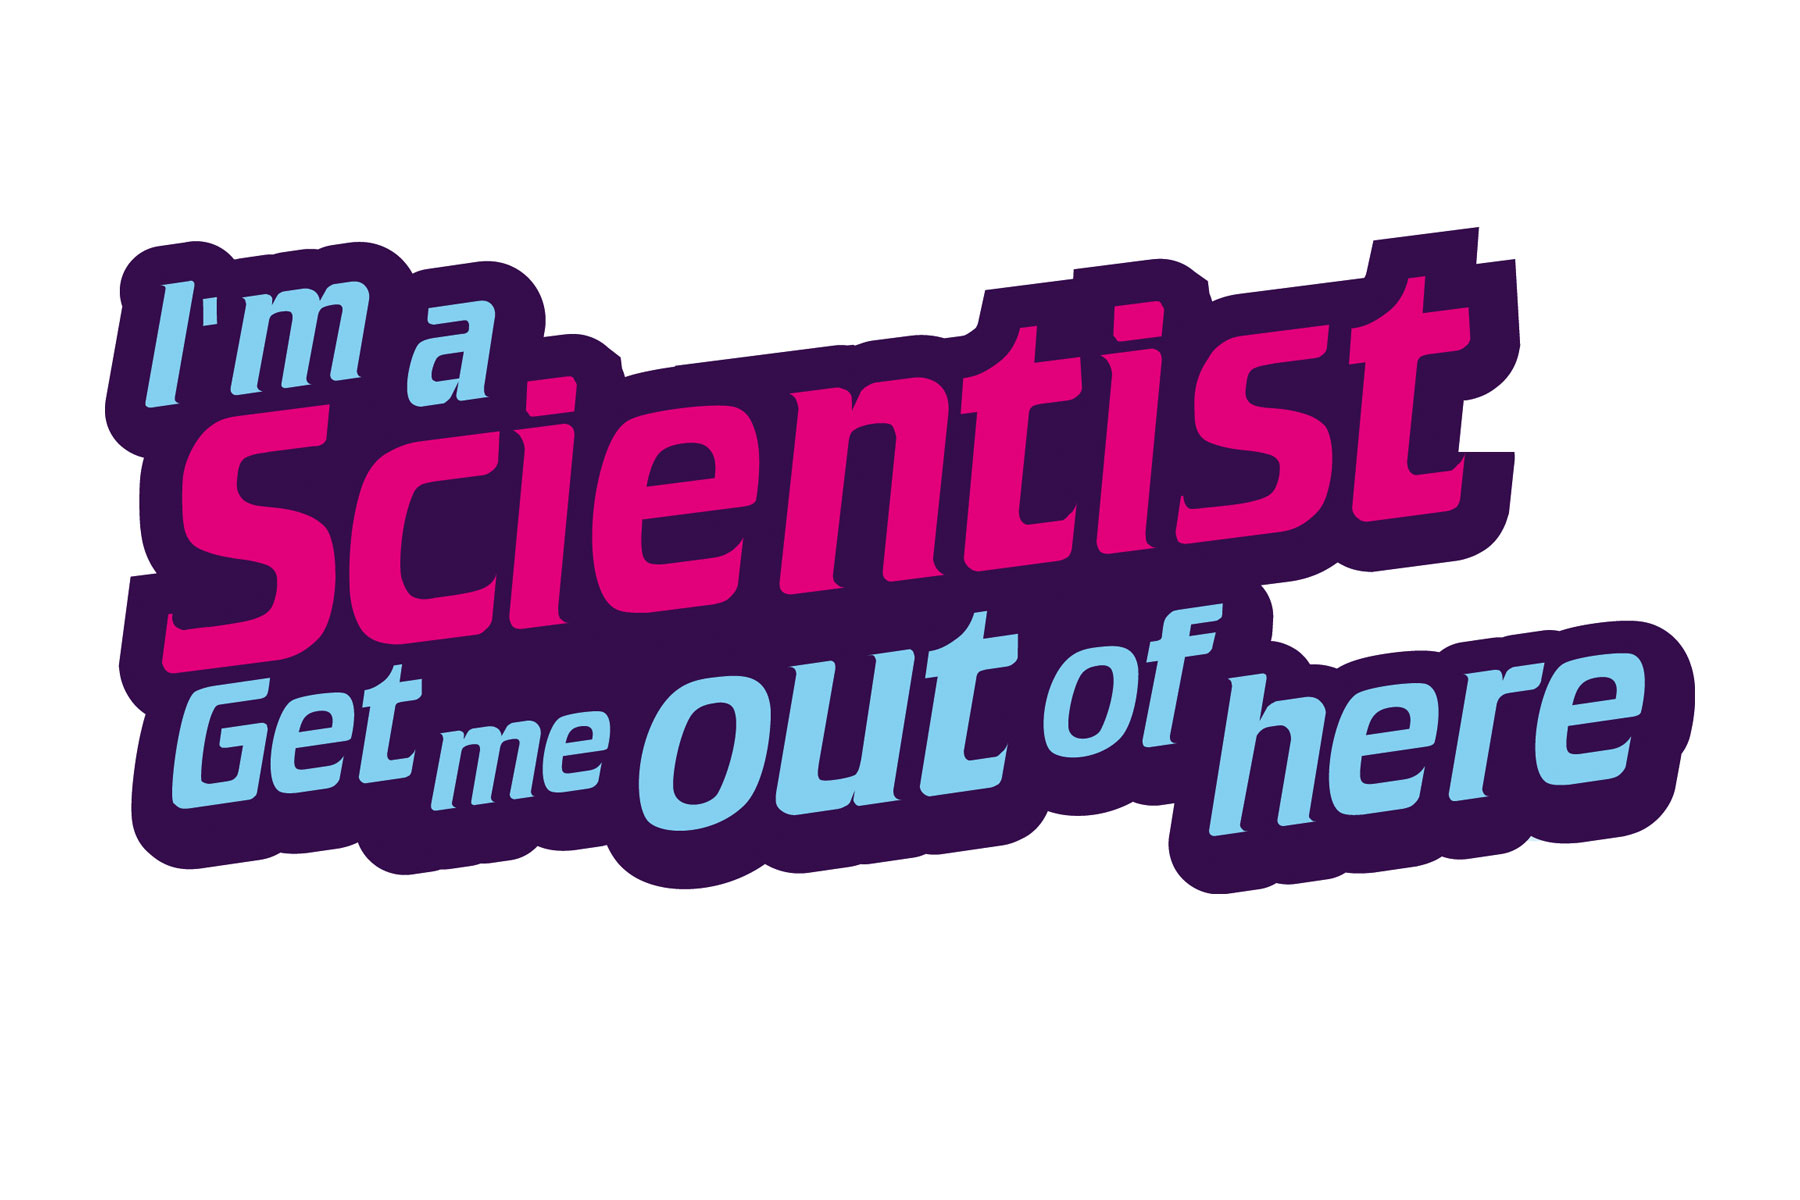 I'm a scientist, get me out of here